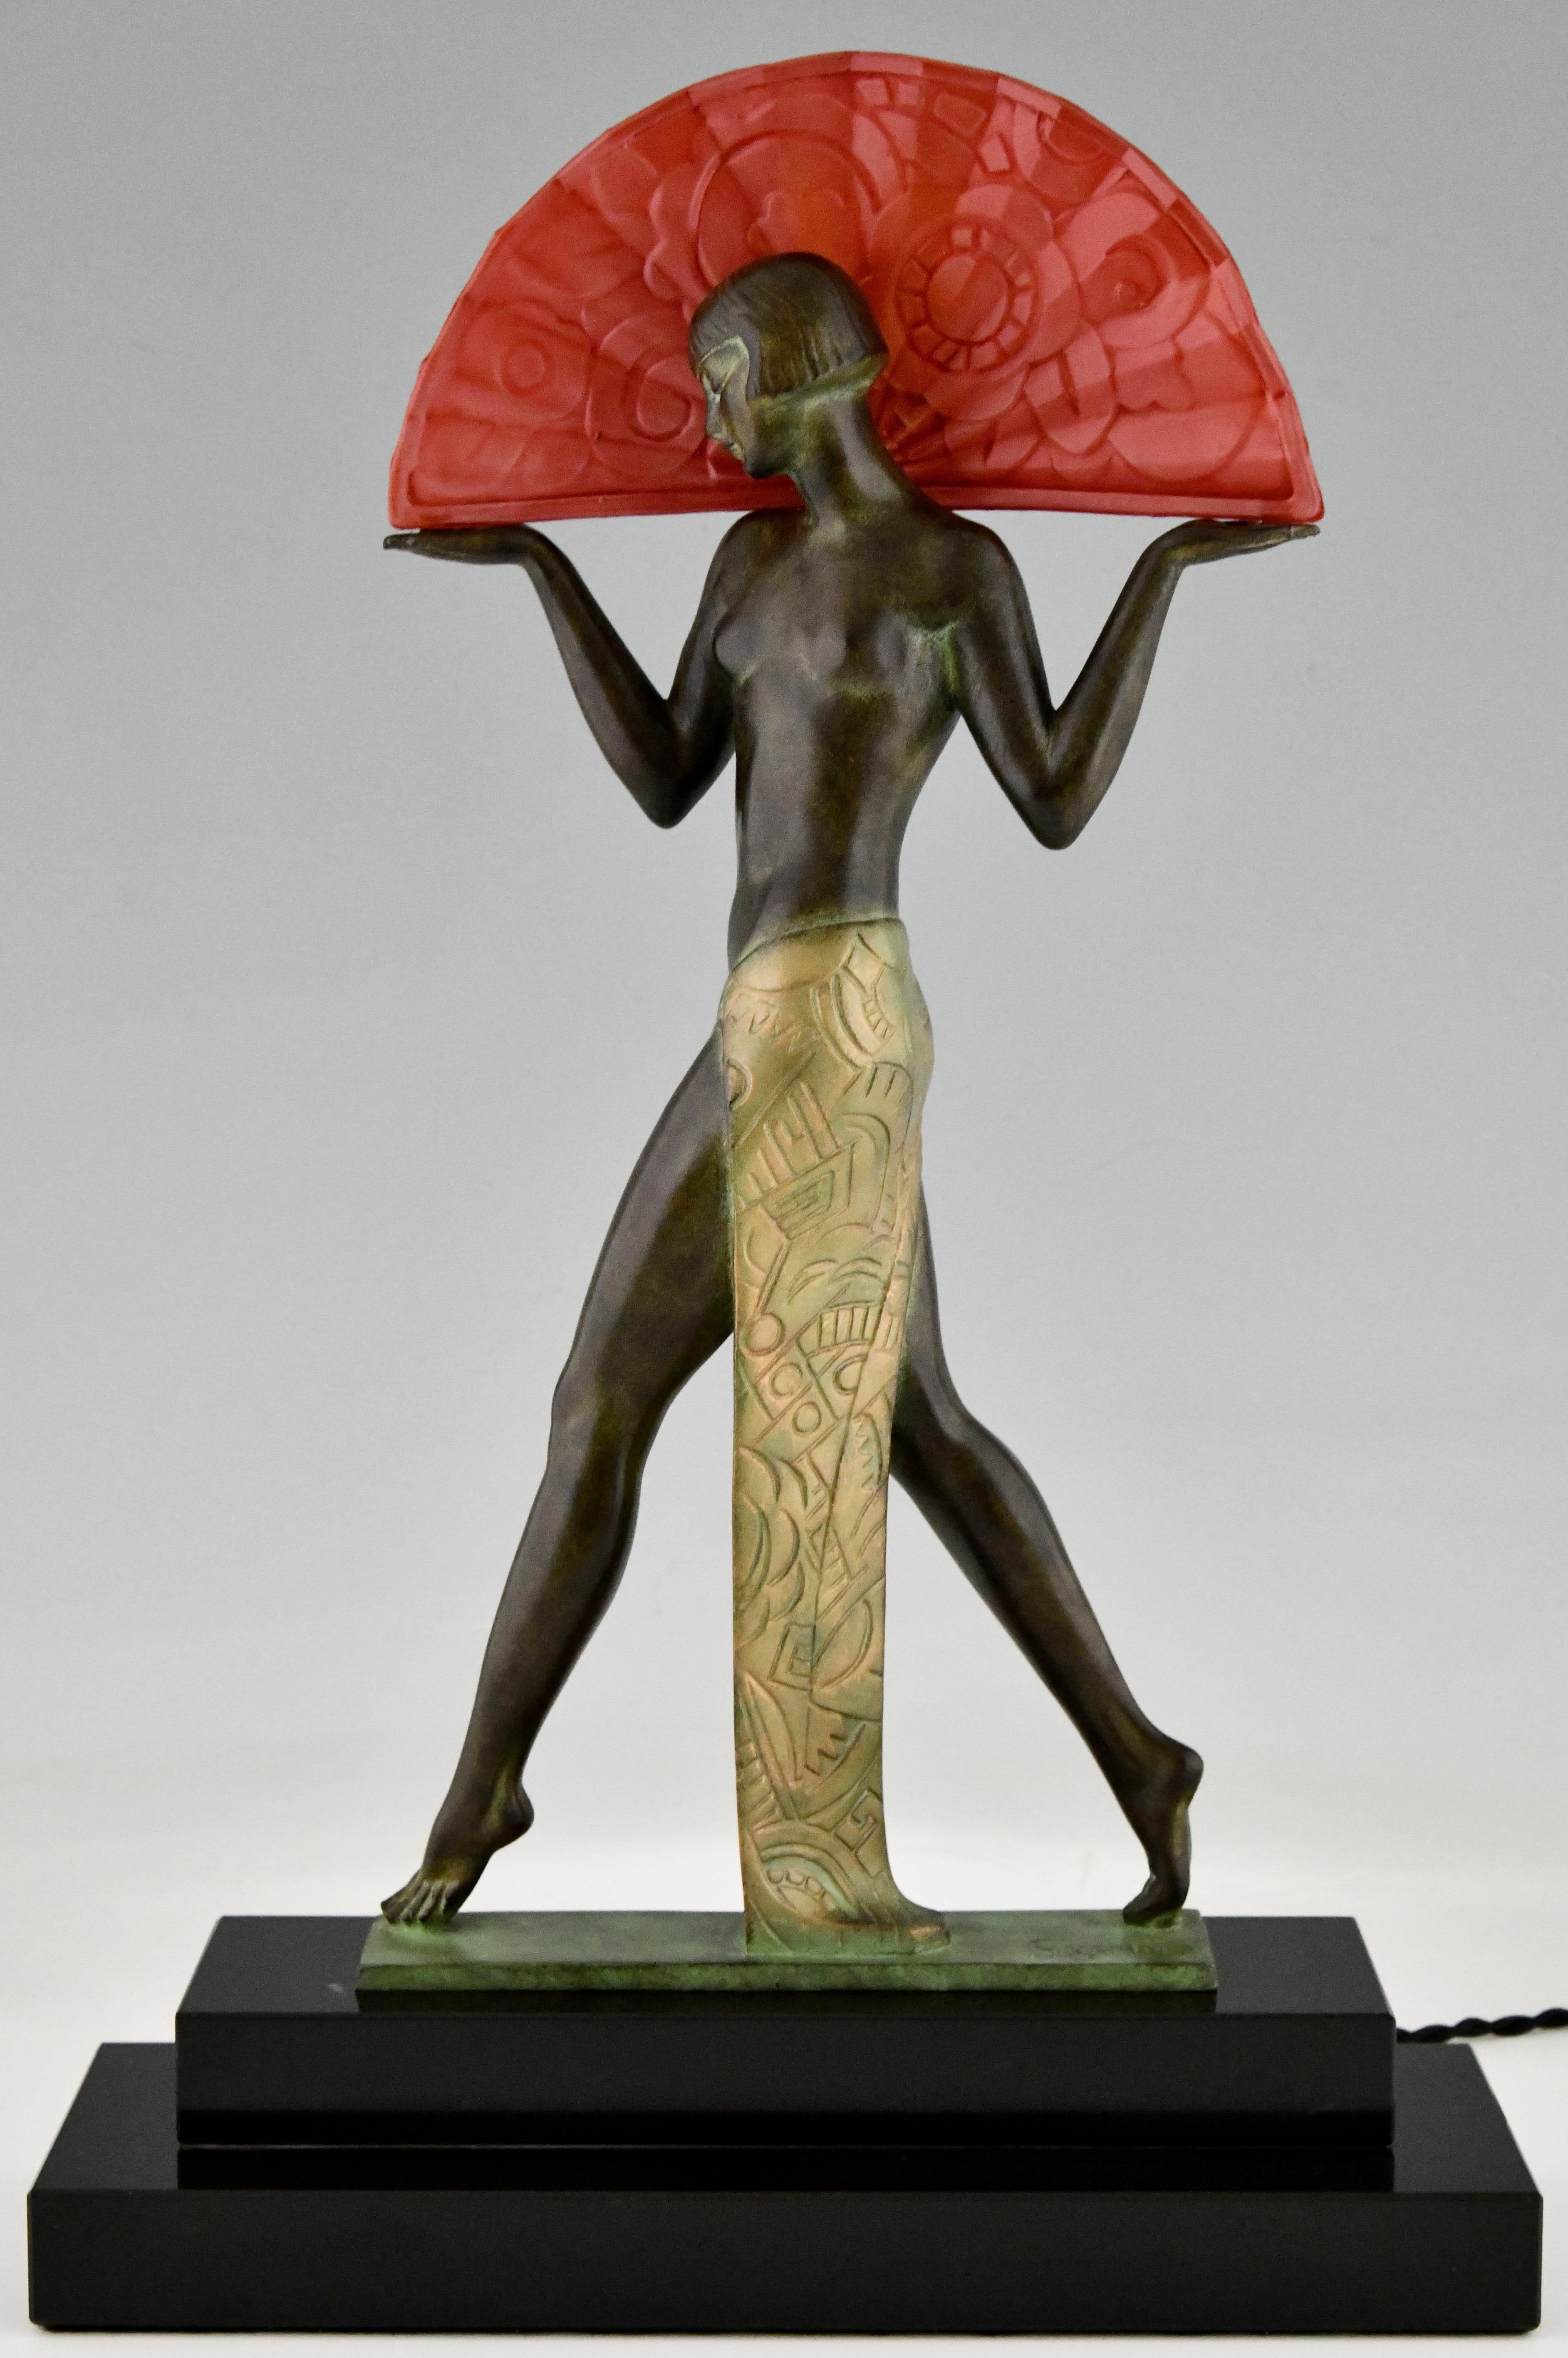 Espana an Art Deco style lamp Spanish dancer lady with fan.
Signed by Raymonde Guerbe with foundry seal.
Designed in 1920-1930.
Posthumous contemporary cast at the Le Verrier foundry. Patinated art metal, red glass fan and black marble base. 

This